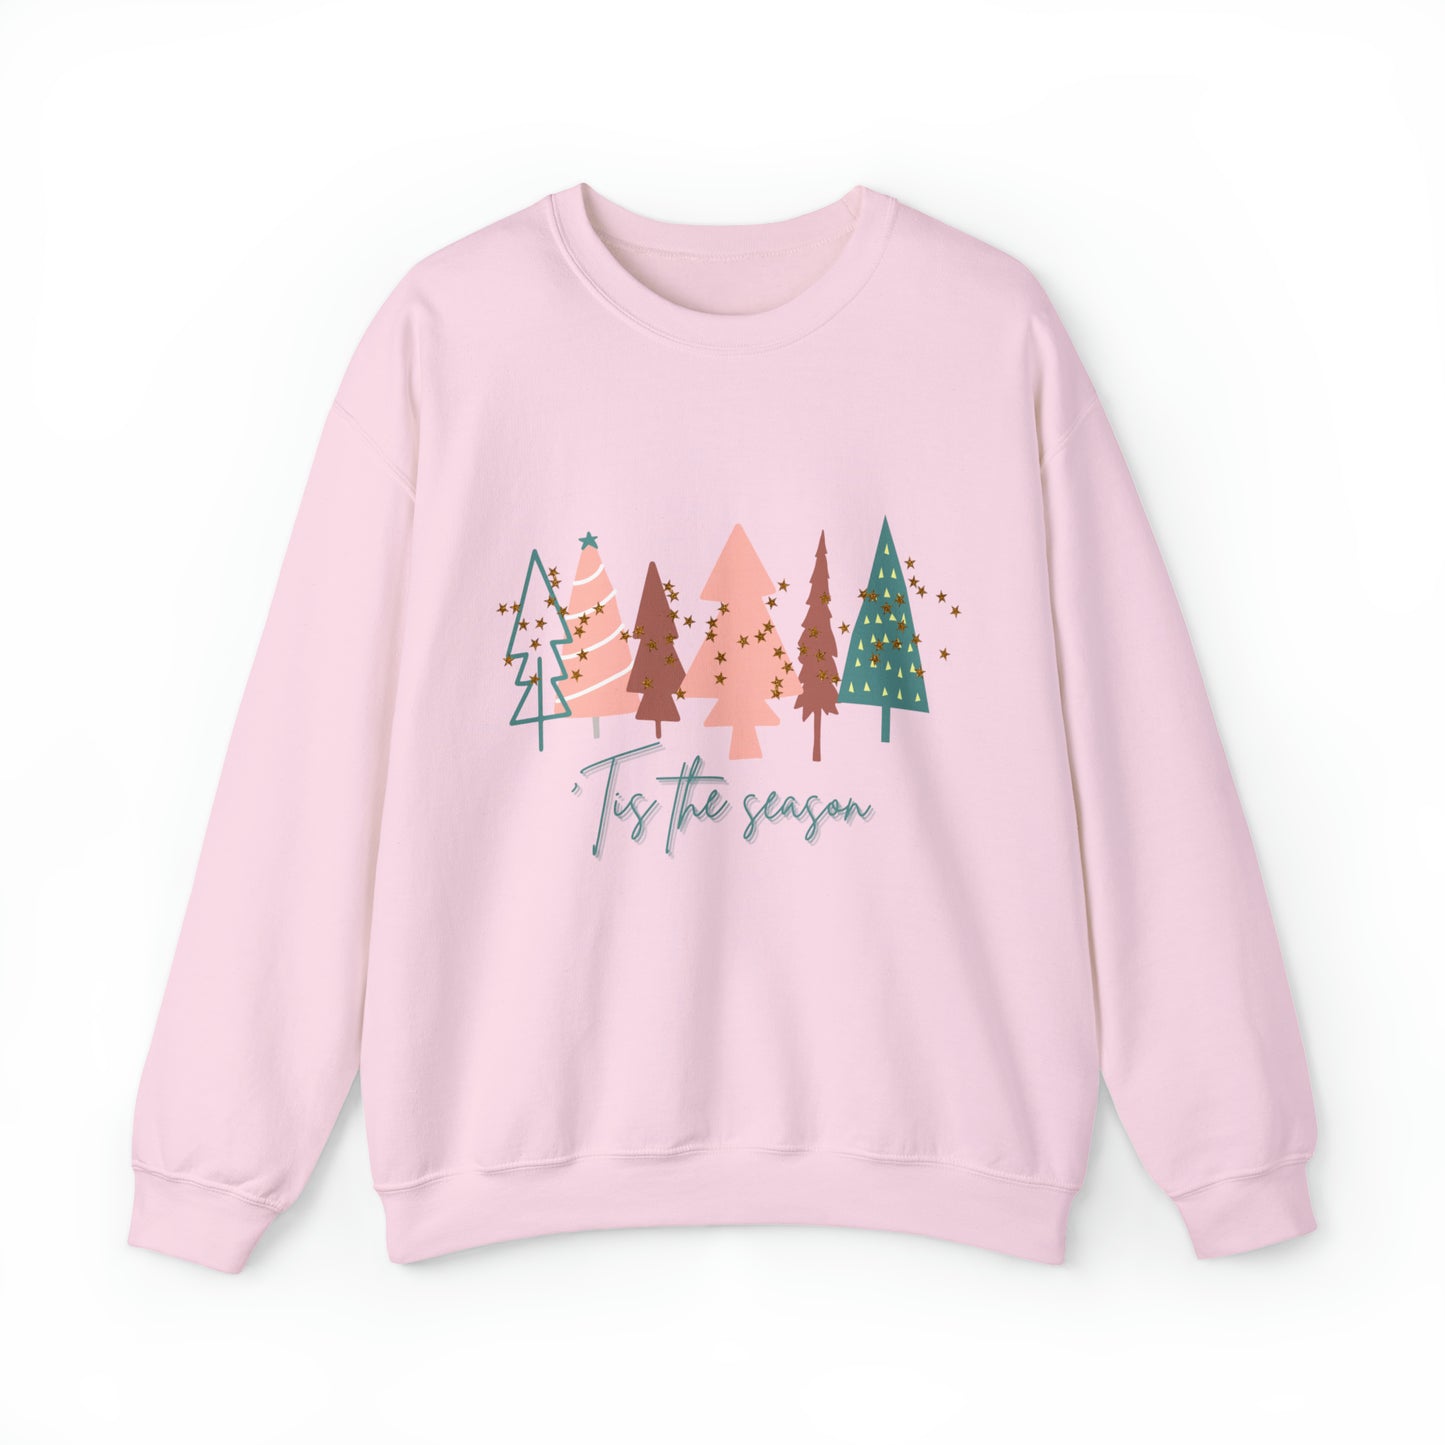 This cozy Printify Light Pink Christmas Tree sweatshirt features trees and the words for the season, making it a perfect addition to your holiday wardrobe.